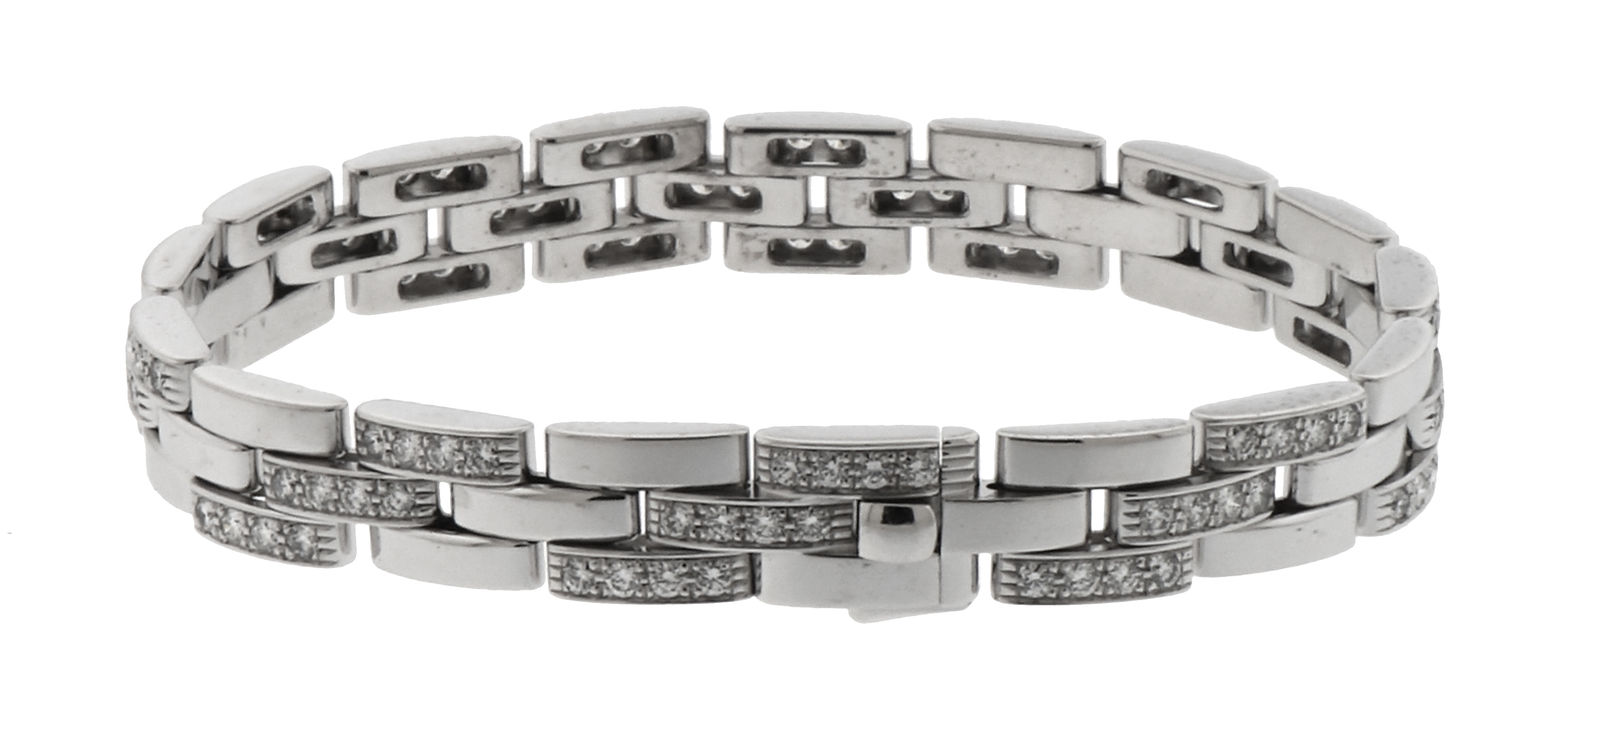 Cartier Panthere 18K White Gold and Diamond Bracelet | New York ...